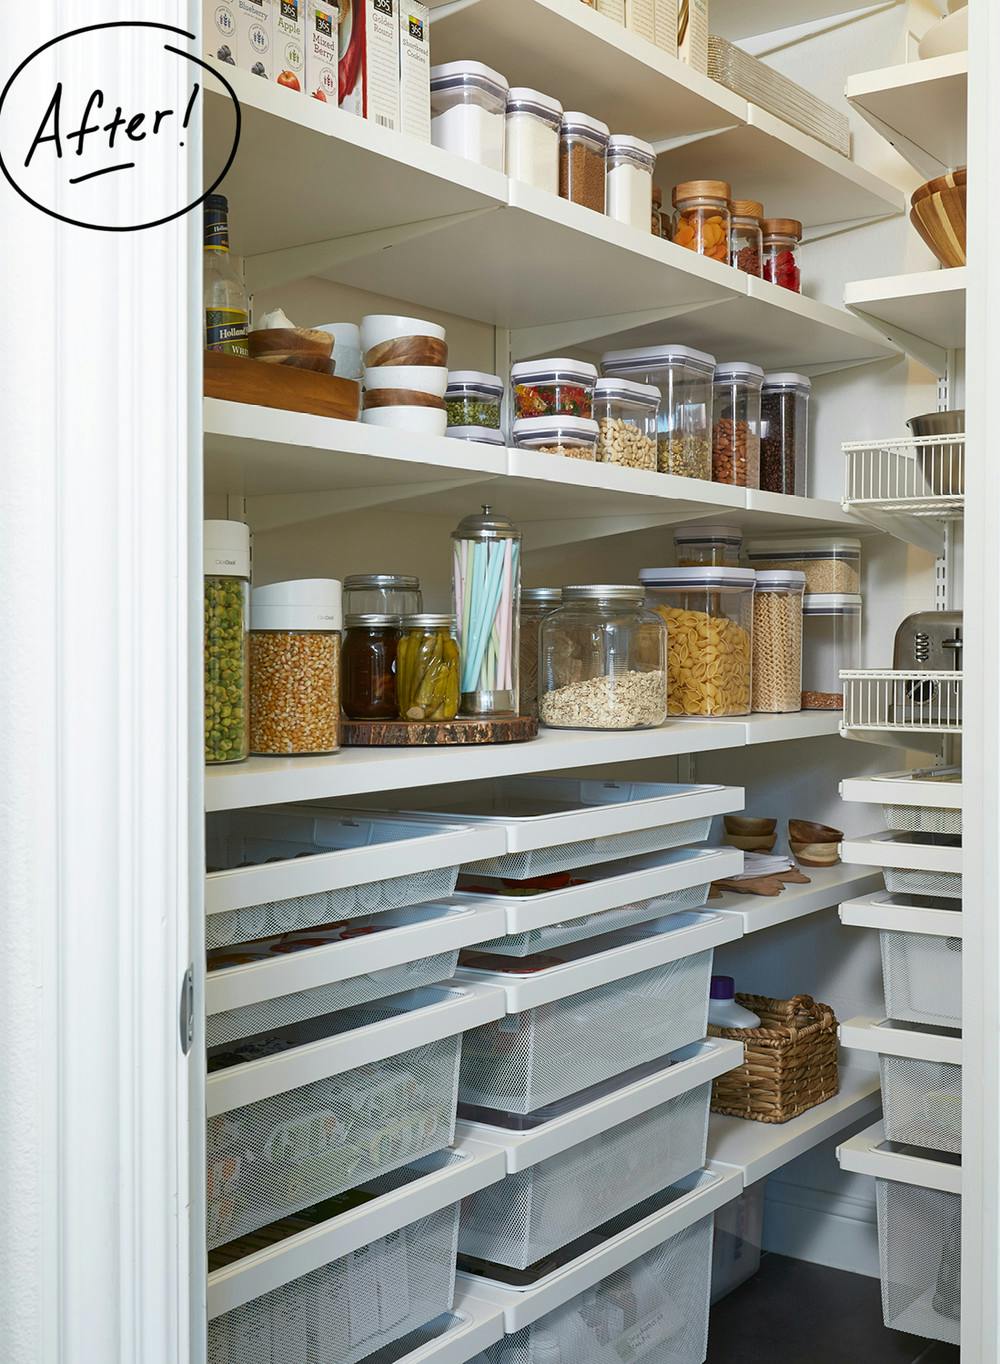 This Pantry Gets Perfected with an elfa Transformation | Container Stories